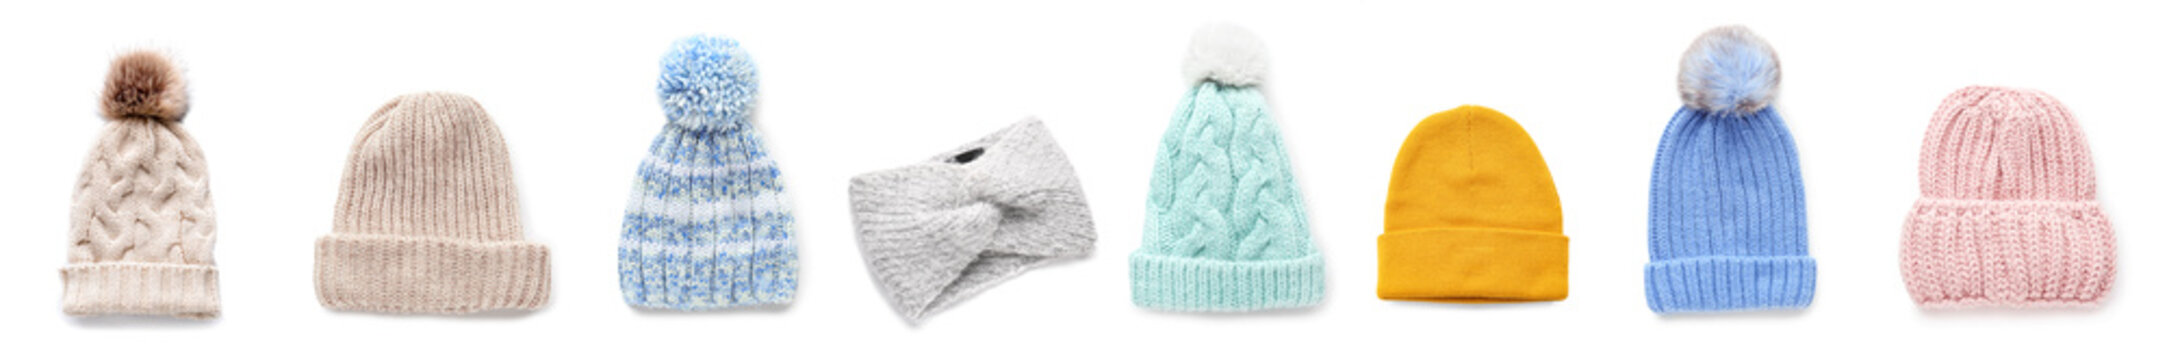 Collage of stylish knitted hats and headband on white background